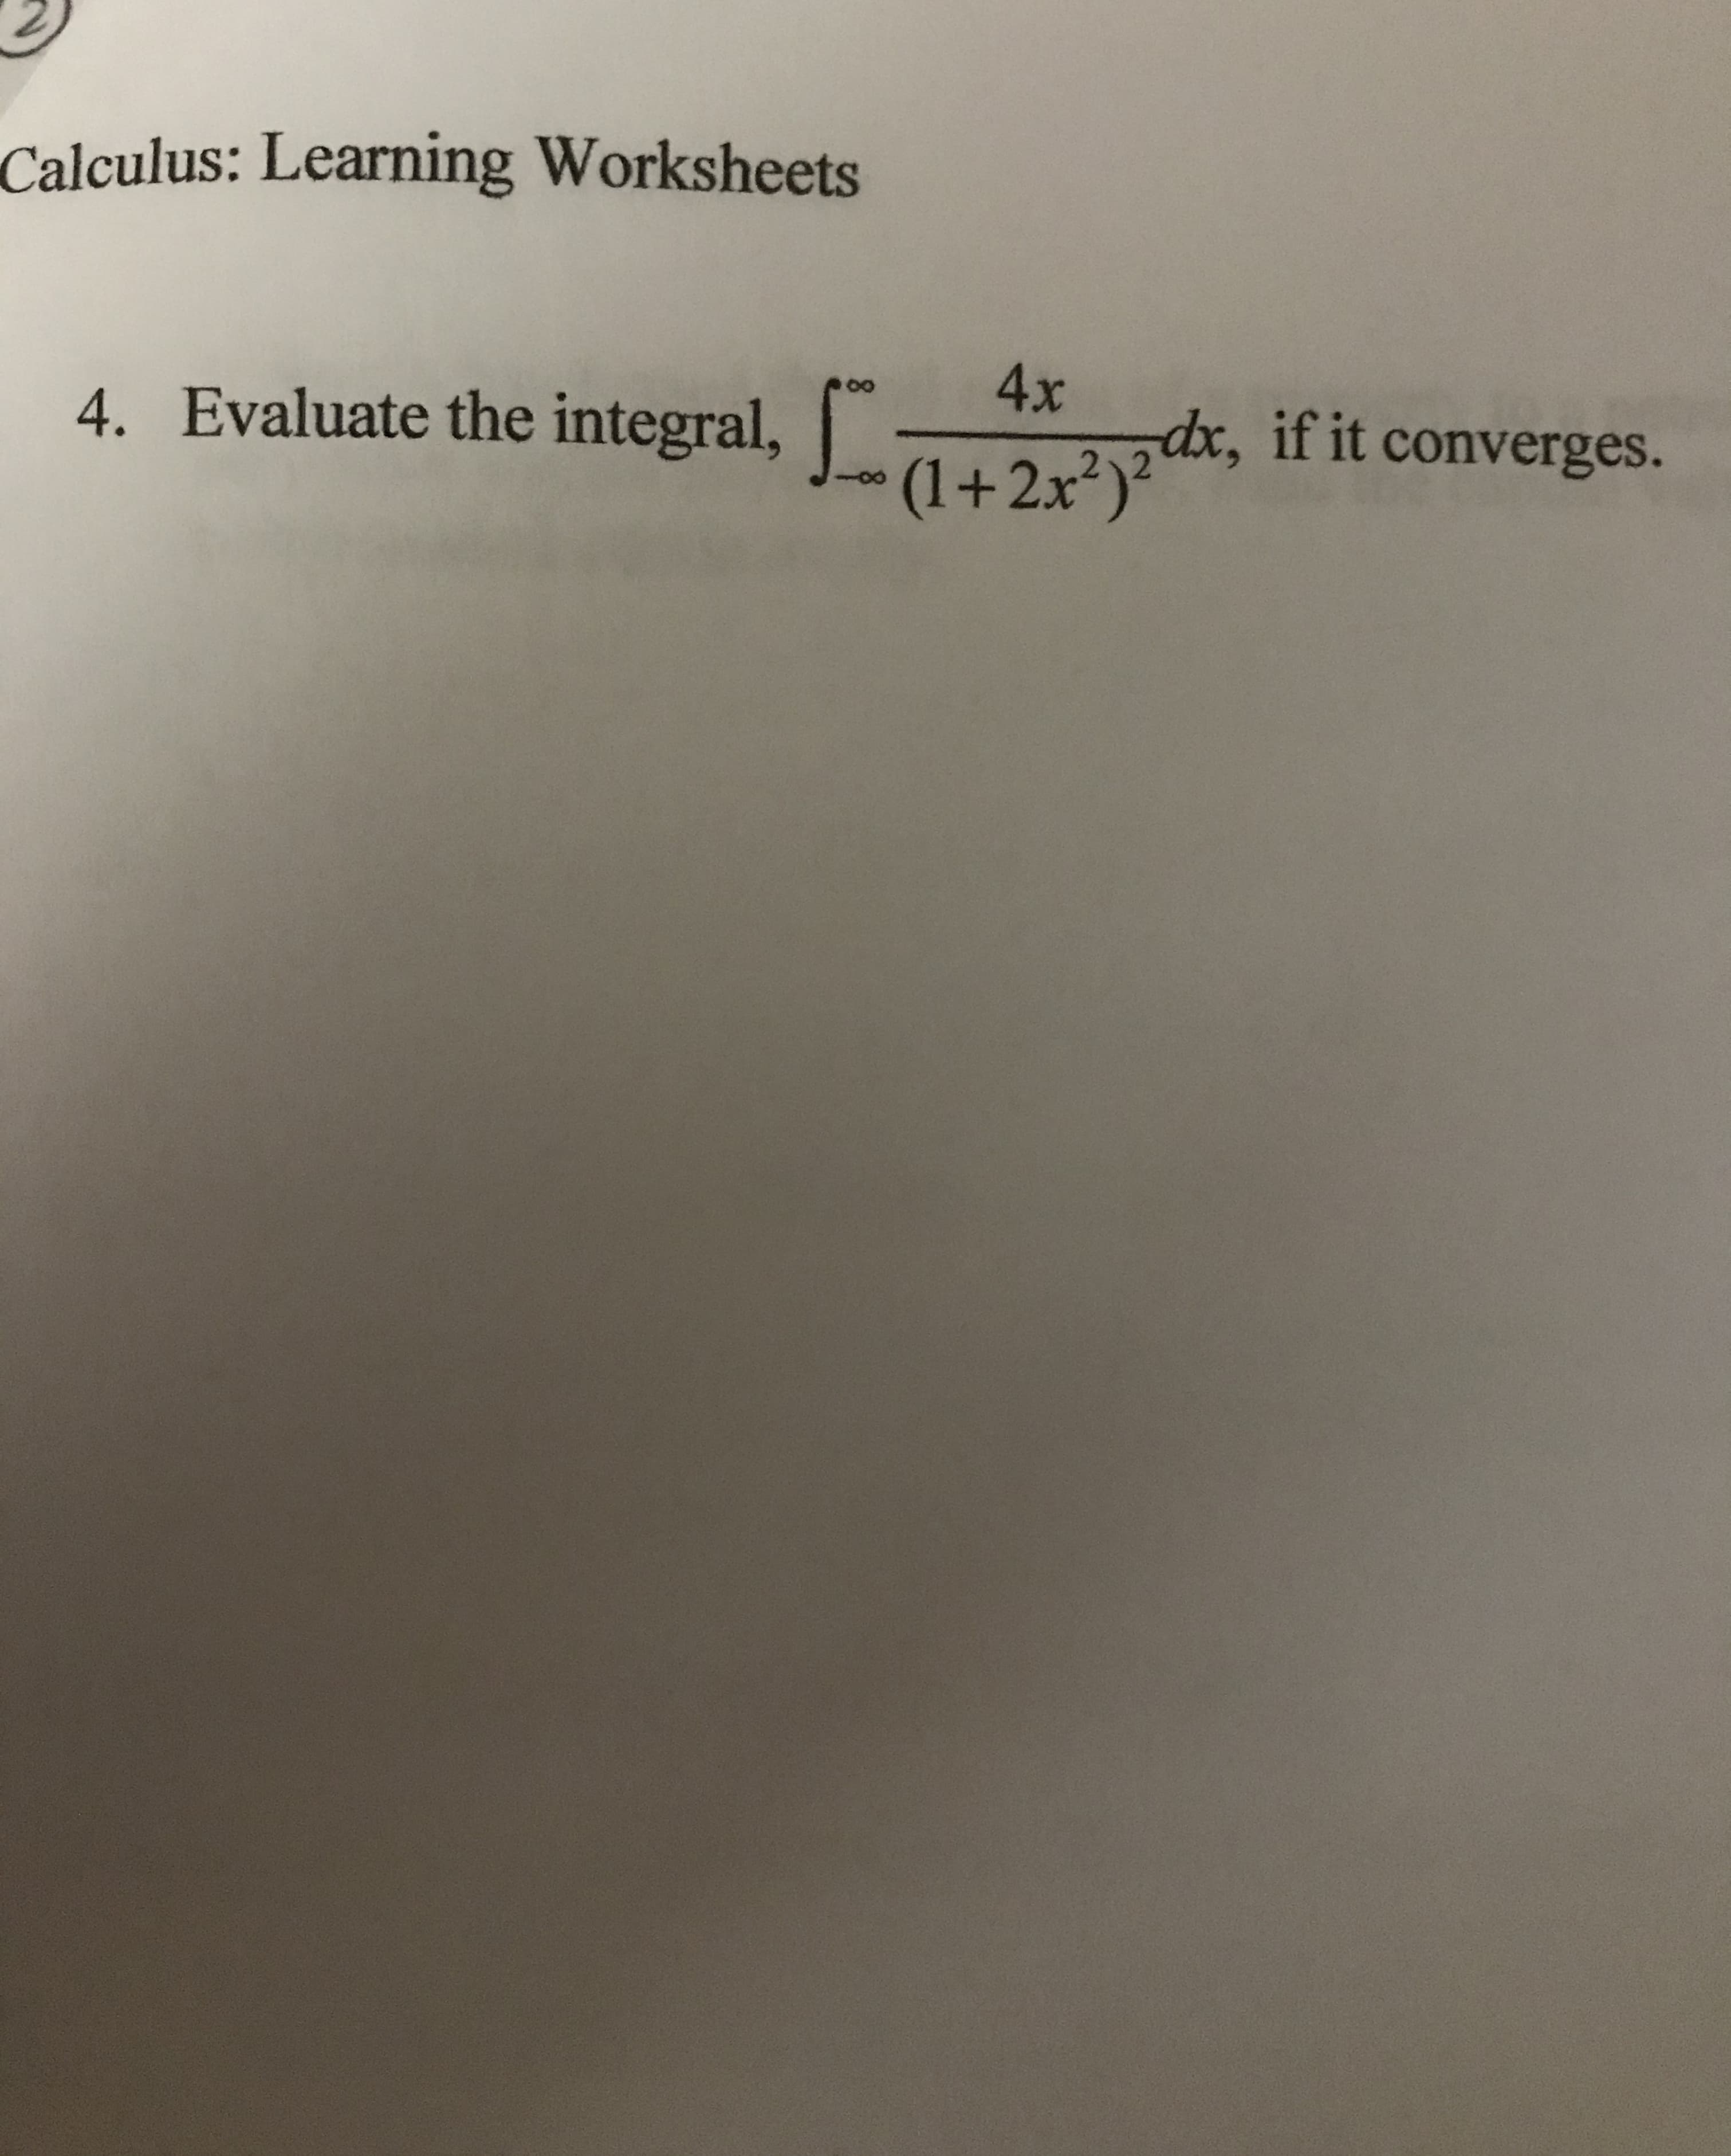 Calculus: Learning Worksheets
4. Evaluate the integral,
4x
(1+2x²)?dx, if it converges.
